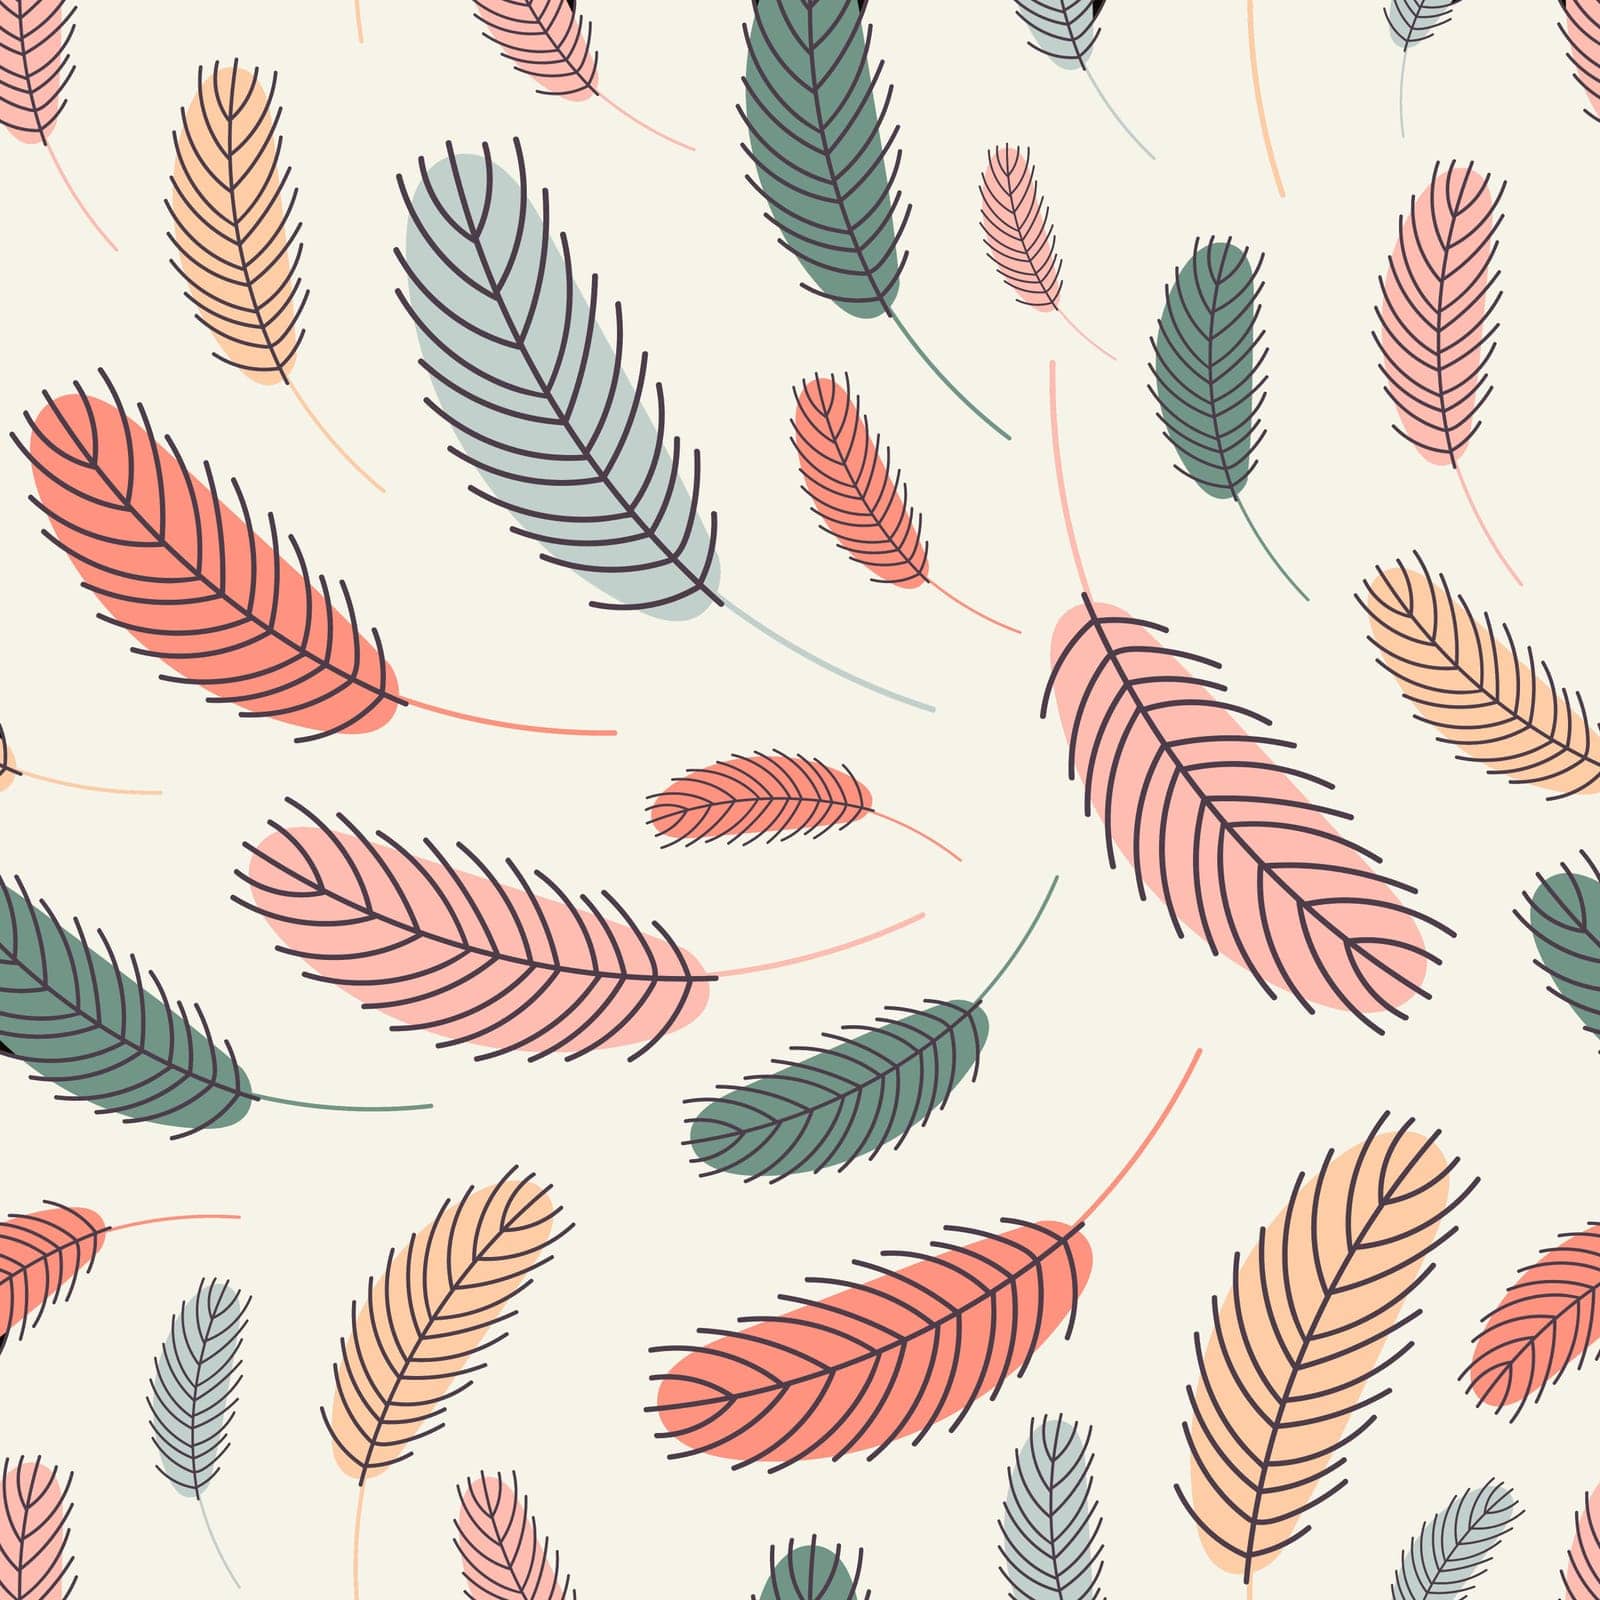 Bird feathers seamless pattern. Pattern with feathers. Vector flat illustration. Design for textiles, packaging, wrappers, greeting cards, paper, printing.